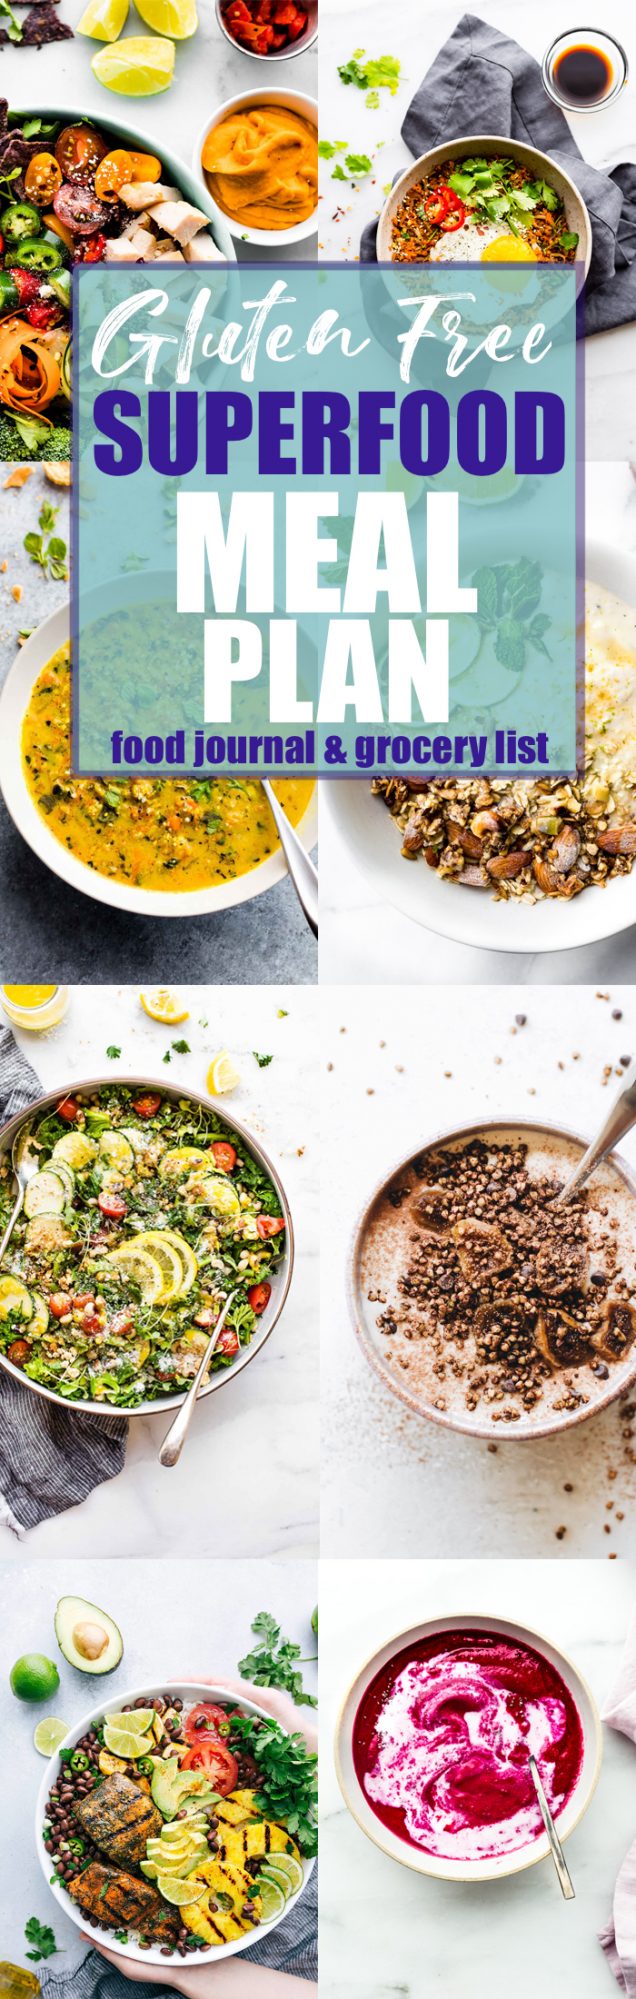 Collage of healthy meals in bowls with text overlay for gluten free superfood meal plan and grocery list